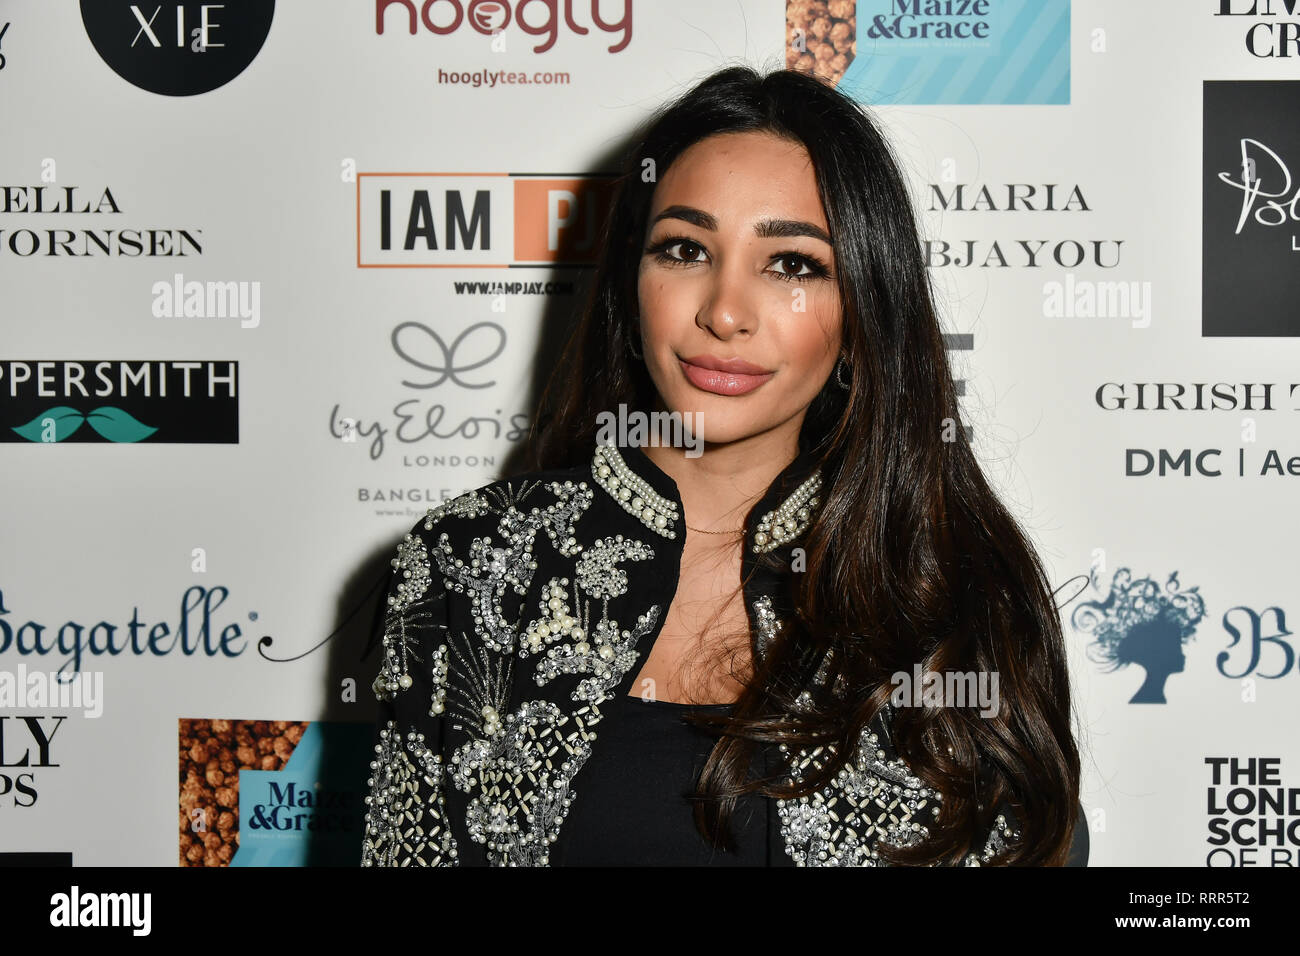 London, UK. 26th Feb 2019. Alizey Mirza attend Nina Naustdal catwalk show SS19/20 collection by The London School of Beauty & Make-up at Bagatelle on 26 Feb 2019, London, UK. Credit: Picture Capital/Alamy Live News Stock Photo